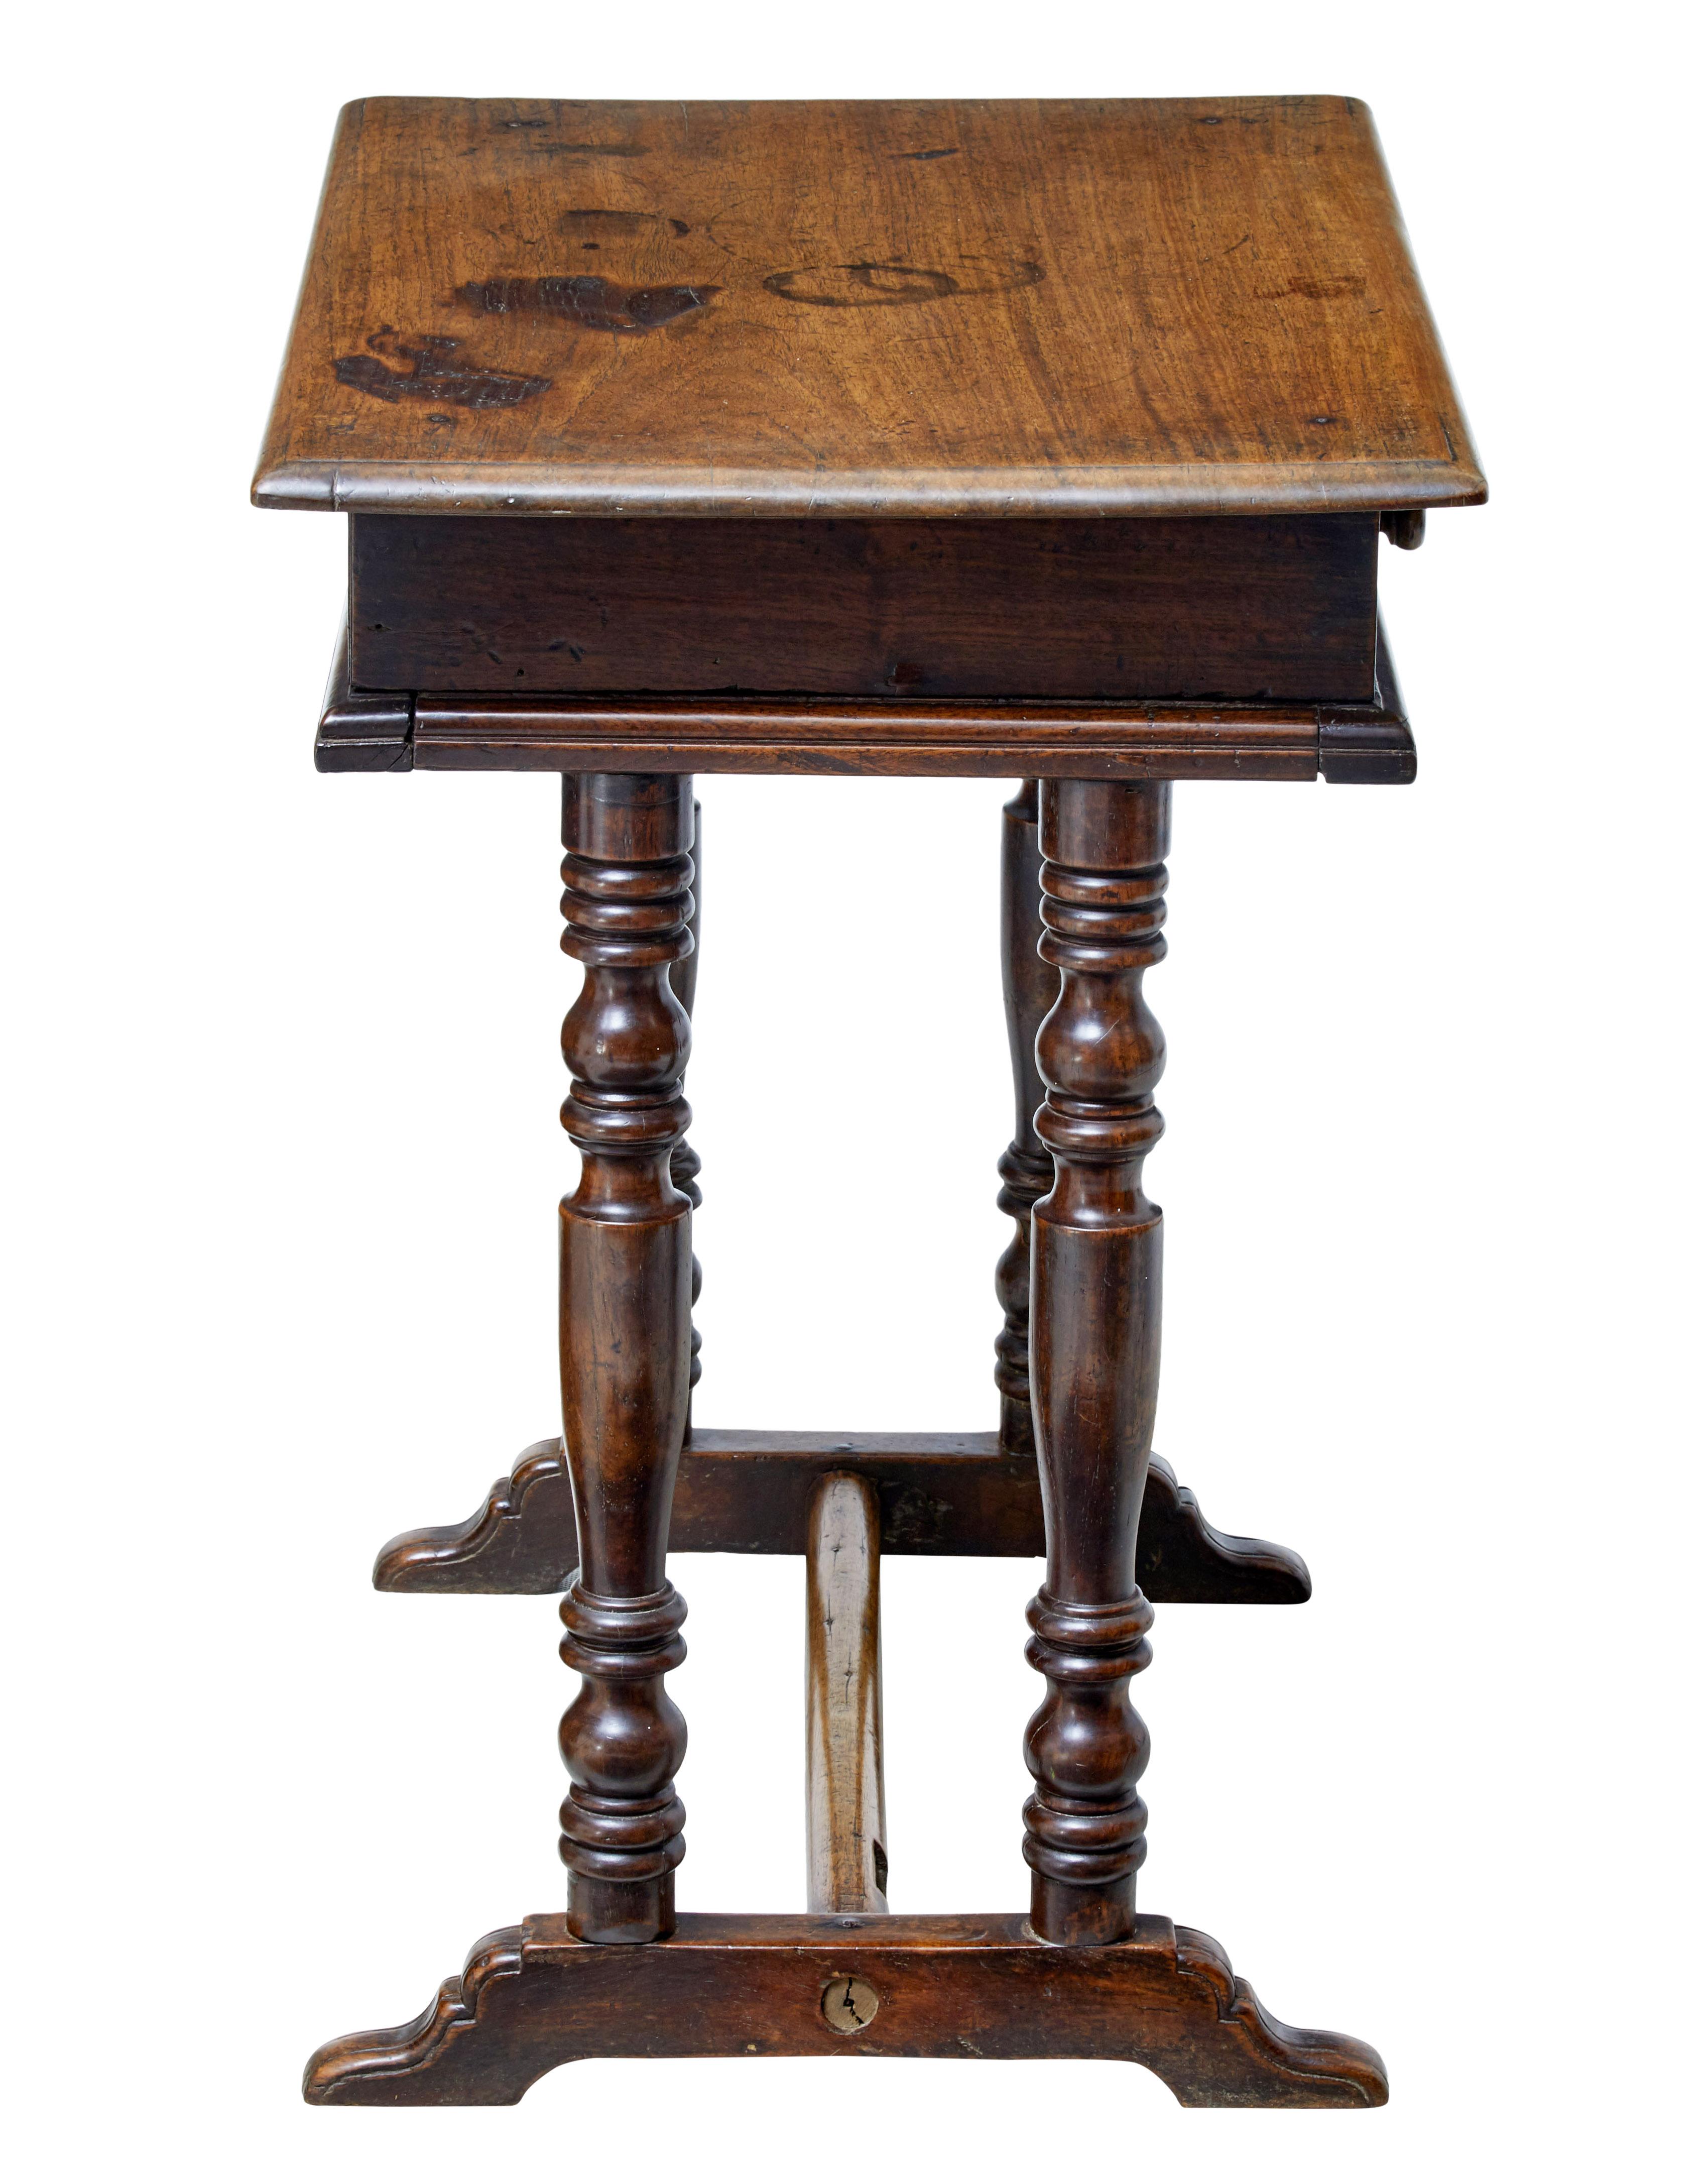 Quirky rustic walnut side table, circa 1780.

Oversailing top beneath which is a single drawer with two turned handles

Standing on four turned legs and sledge feet, united by stretcher.

Lock missing to drawer, surface burns and staining to